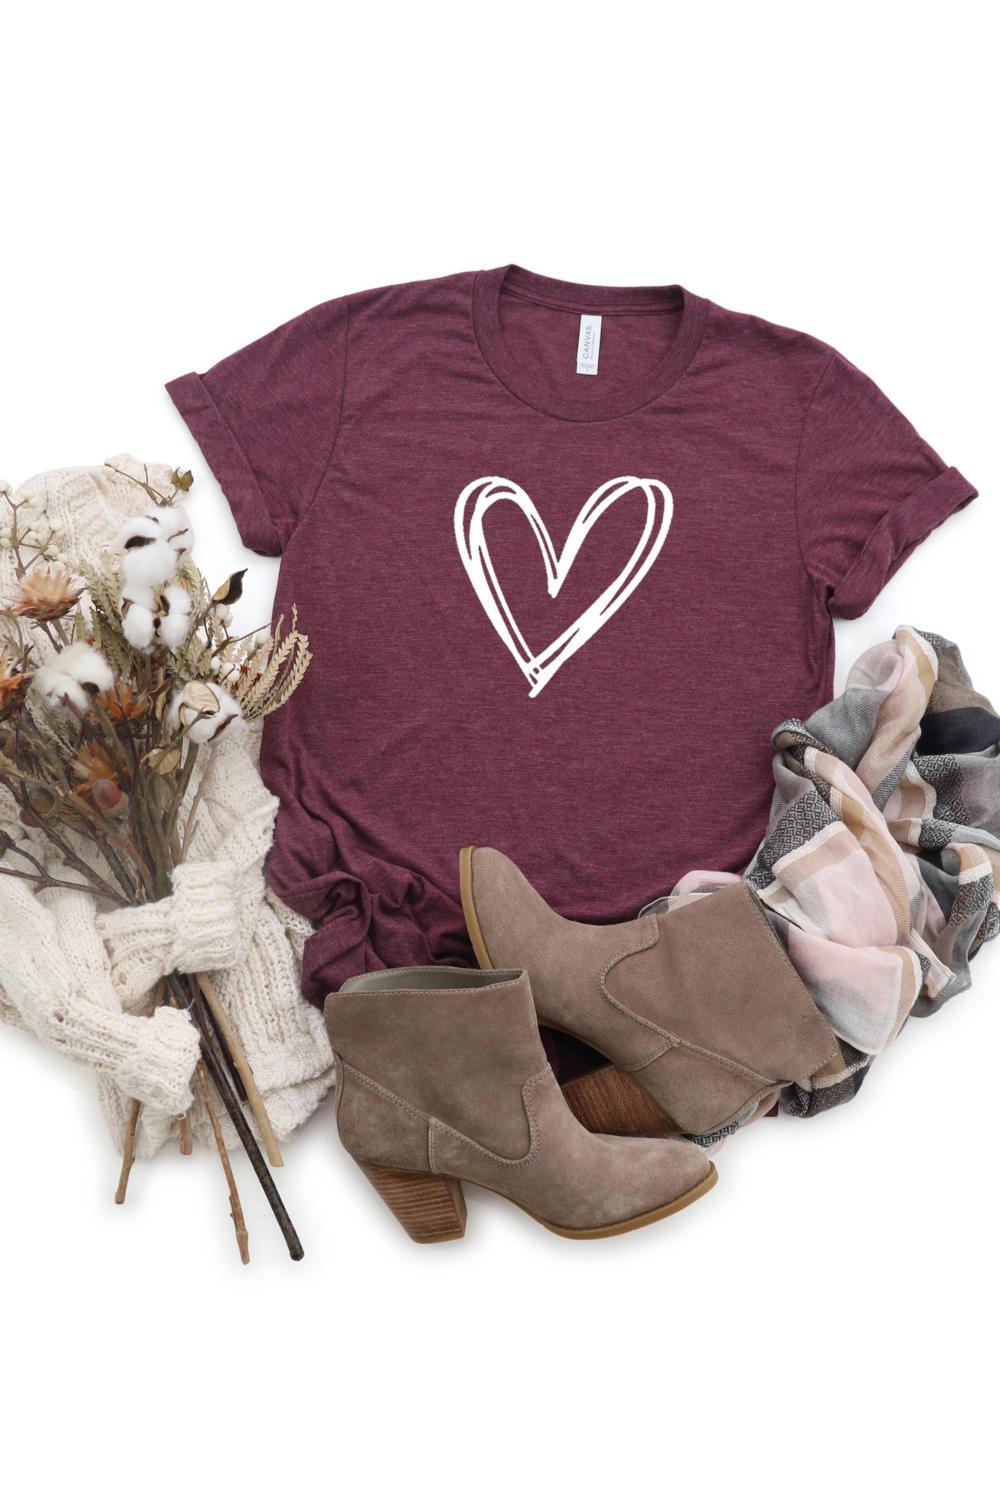 Mulberry Heart Graphic Tee - Strawberry Moon Boutique